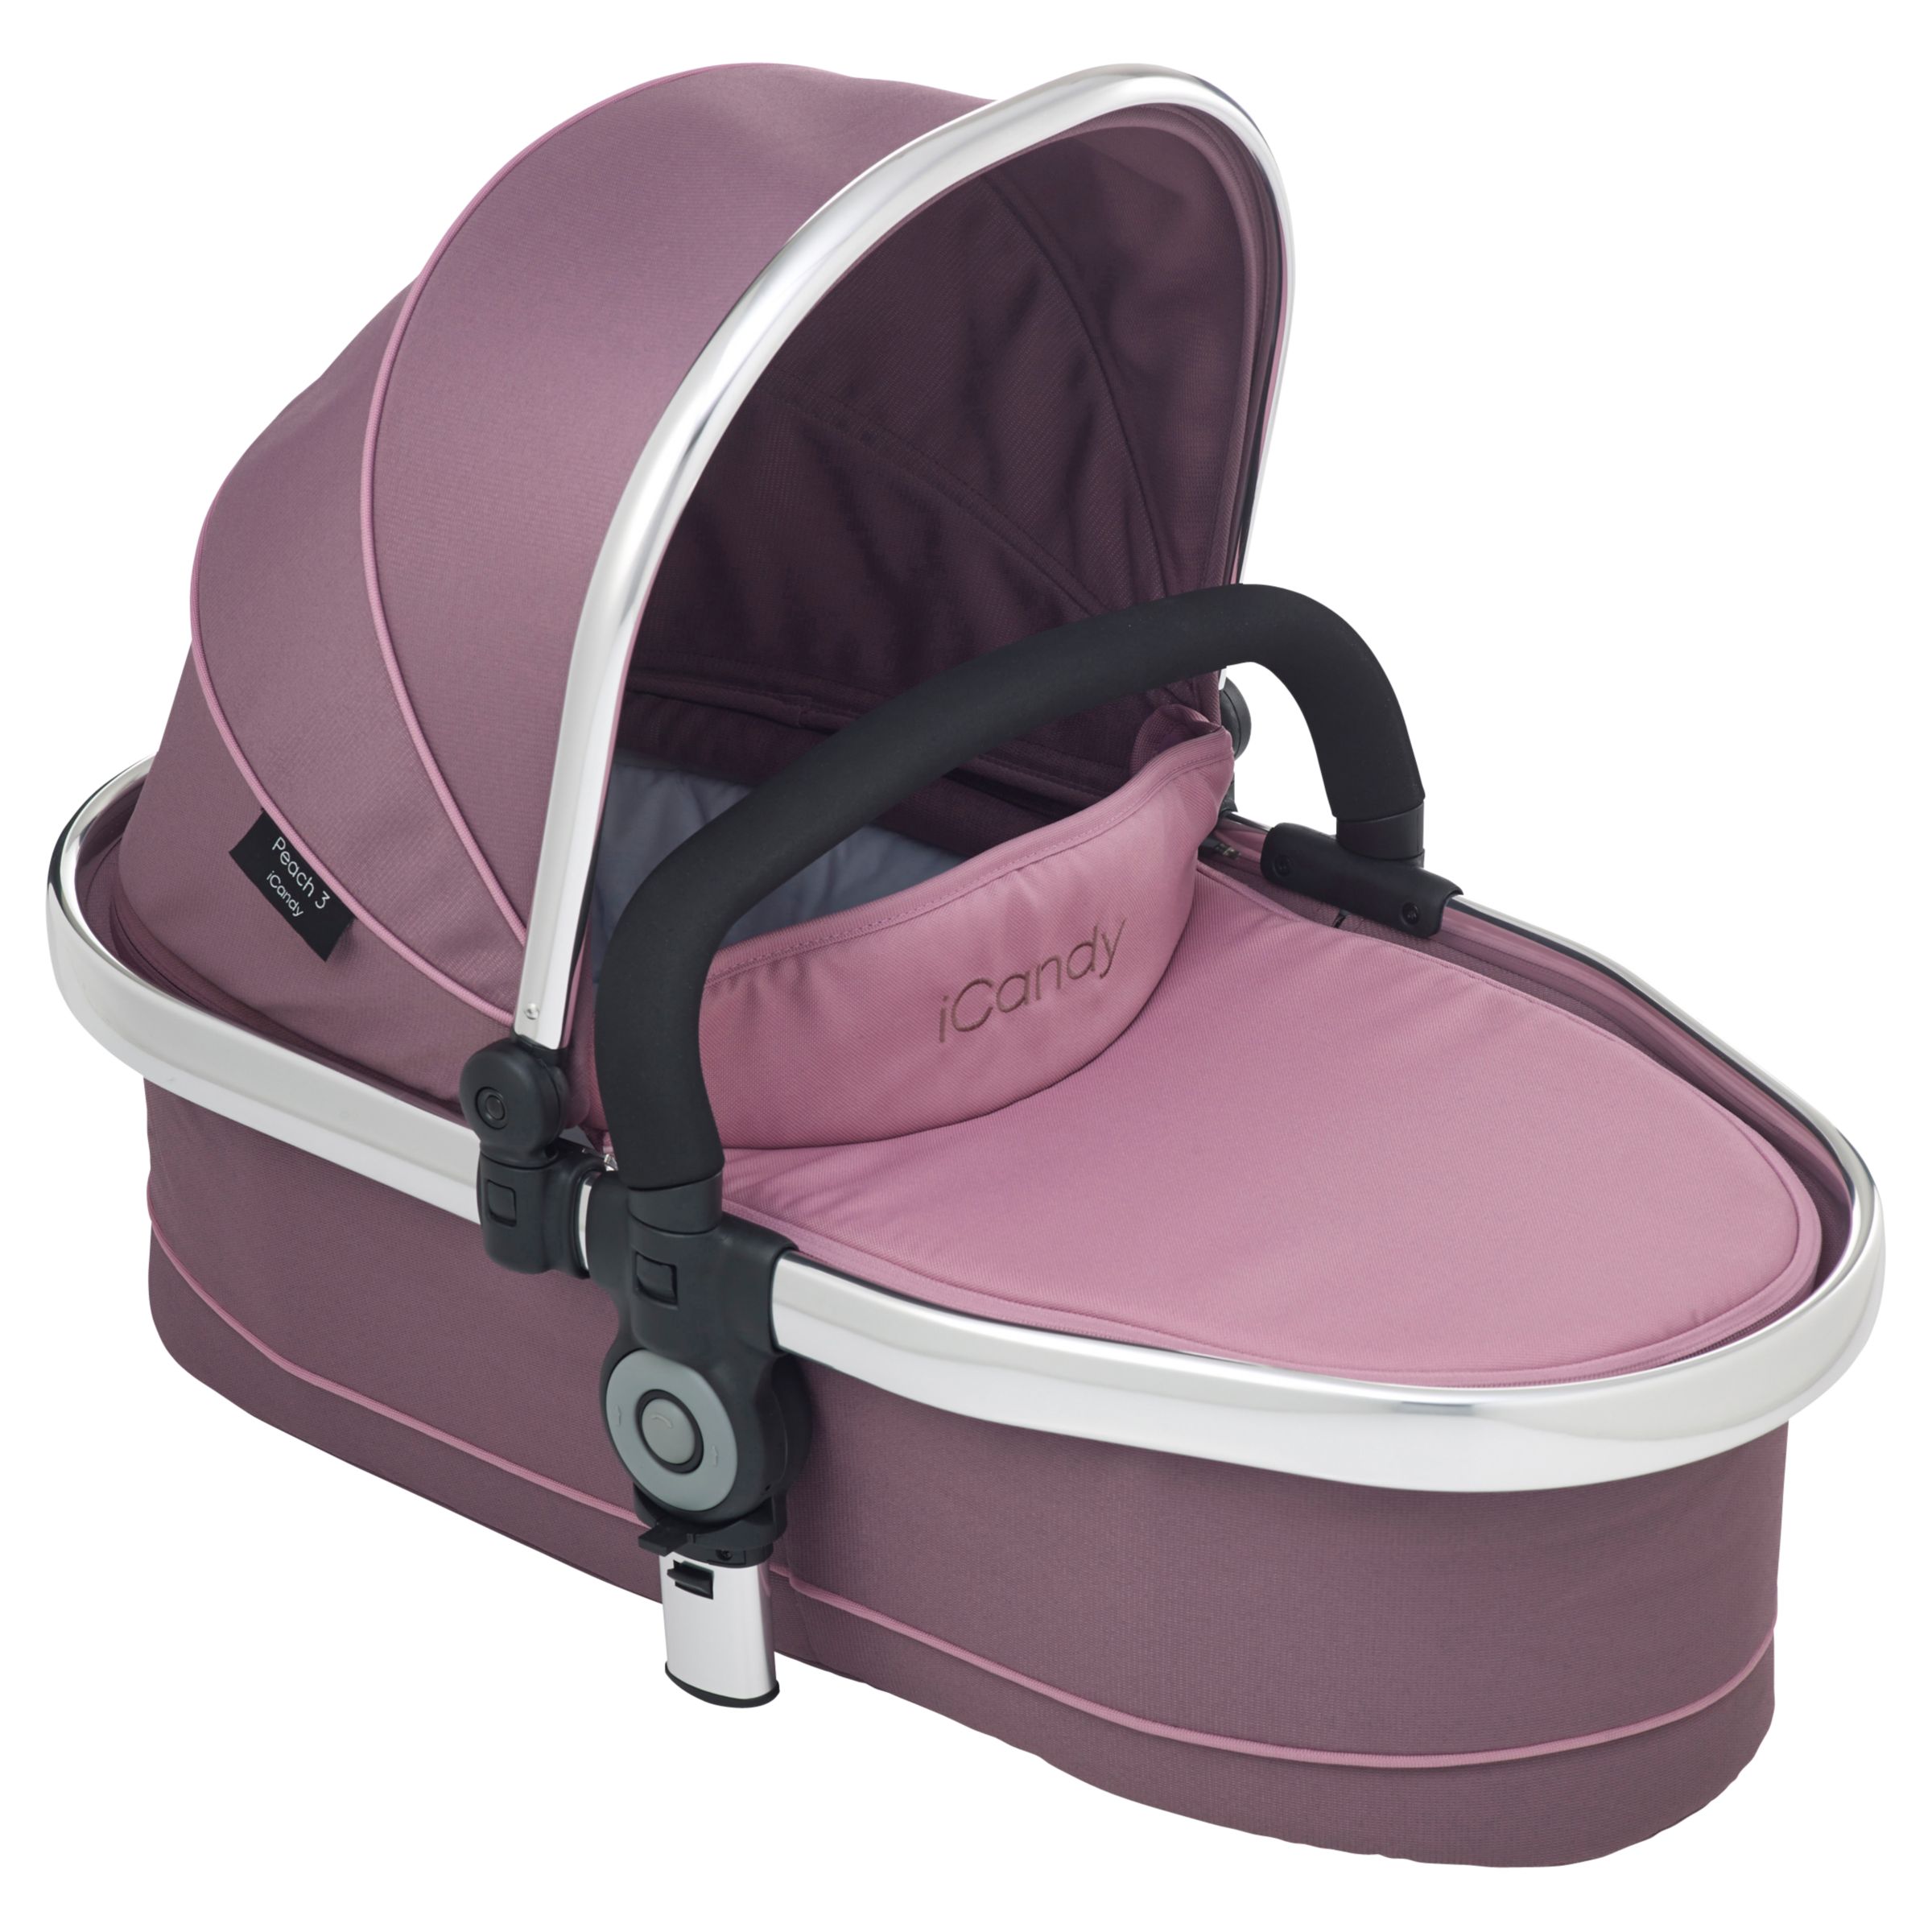 icandy peach 3 carrycot rain cover